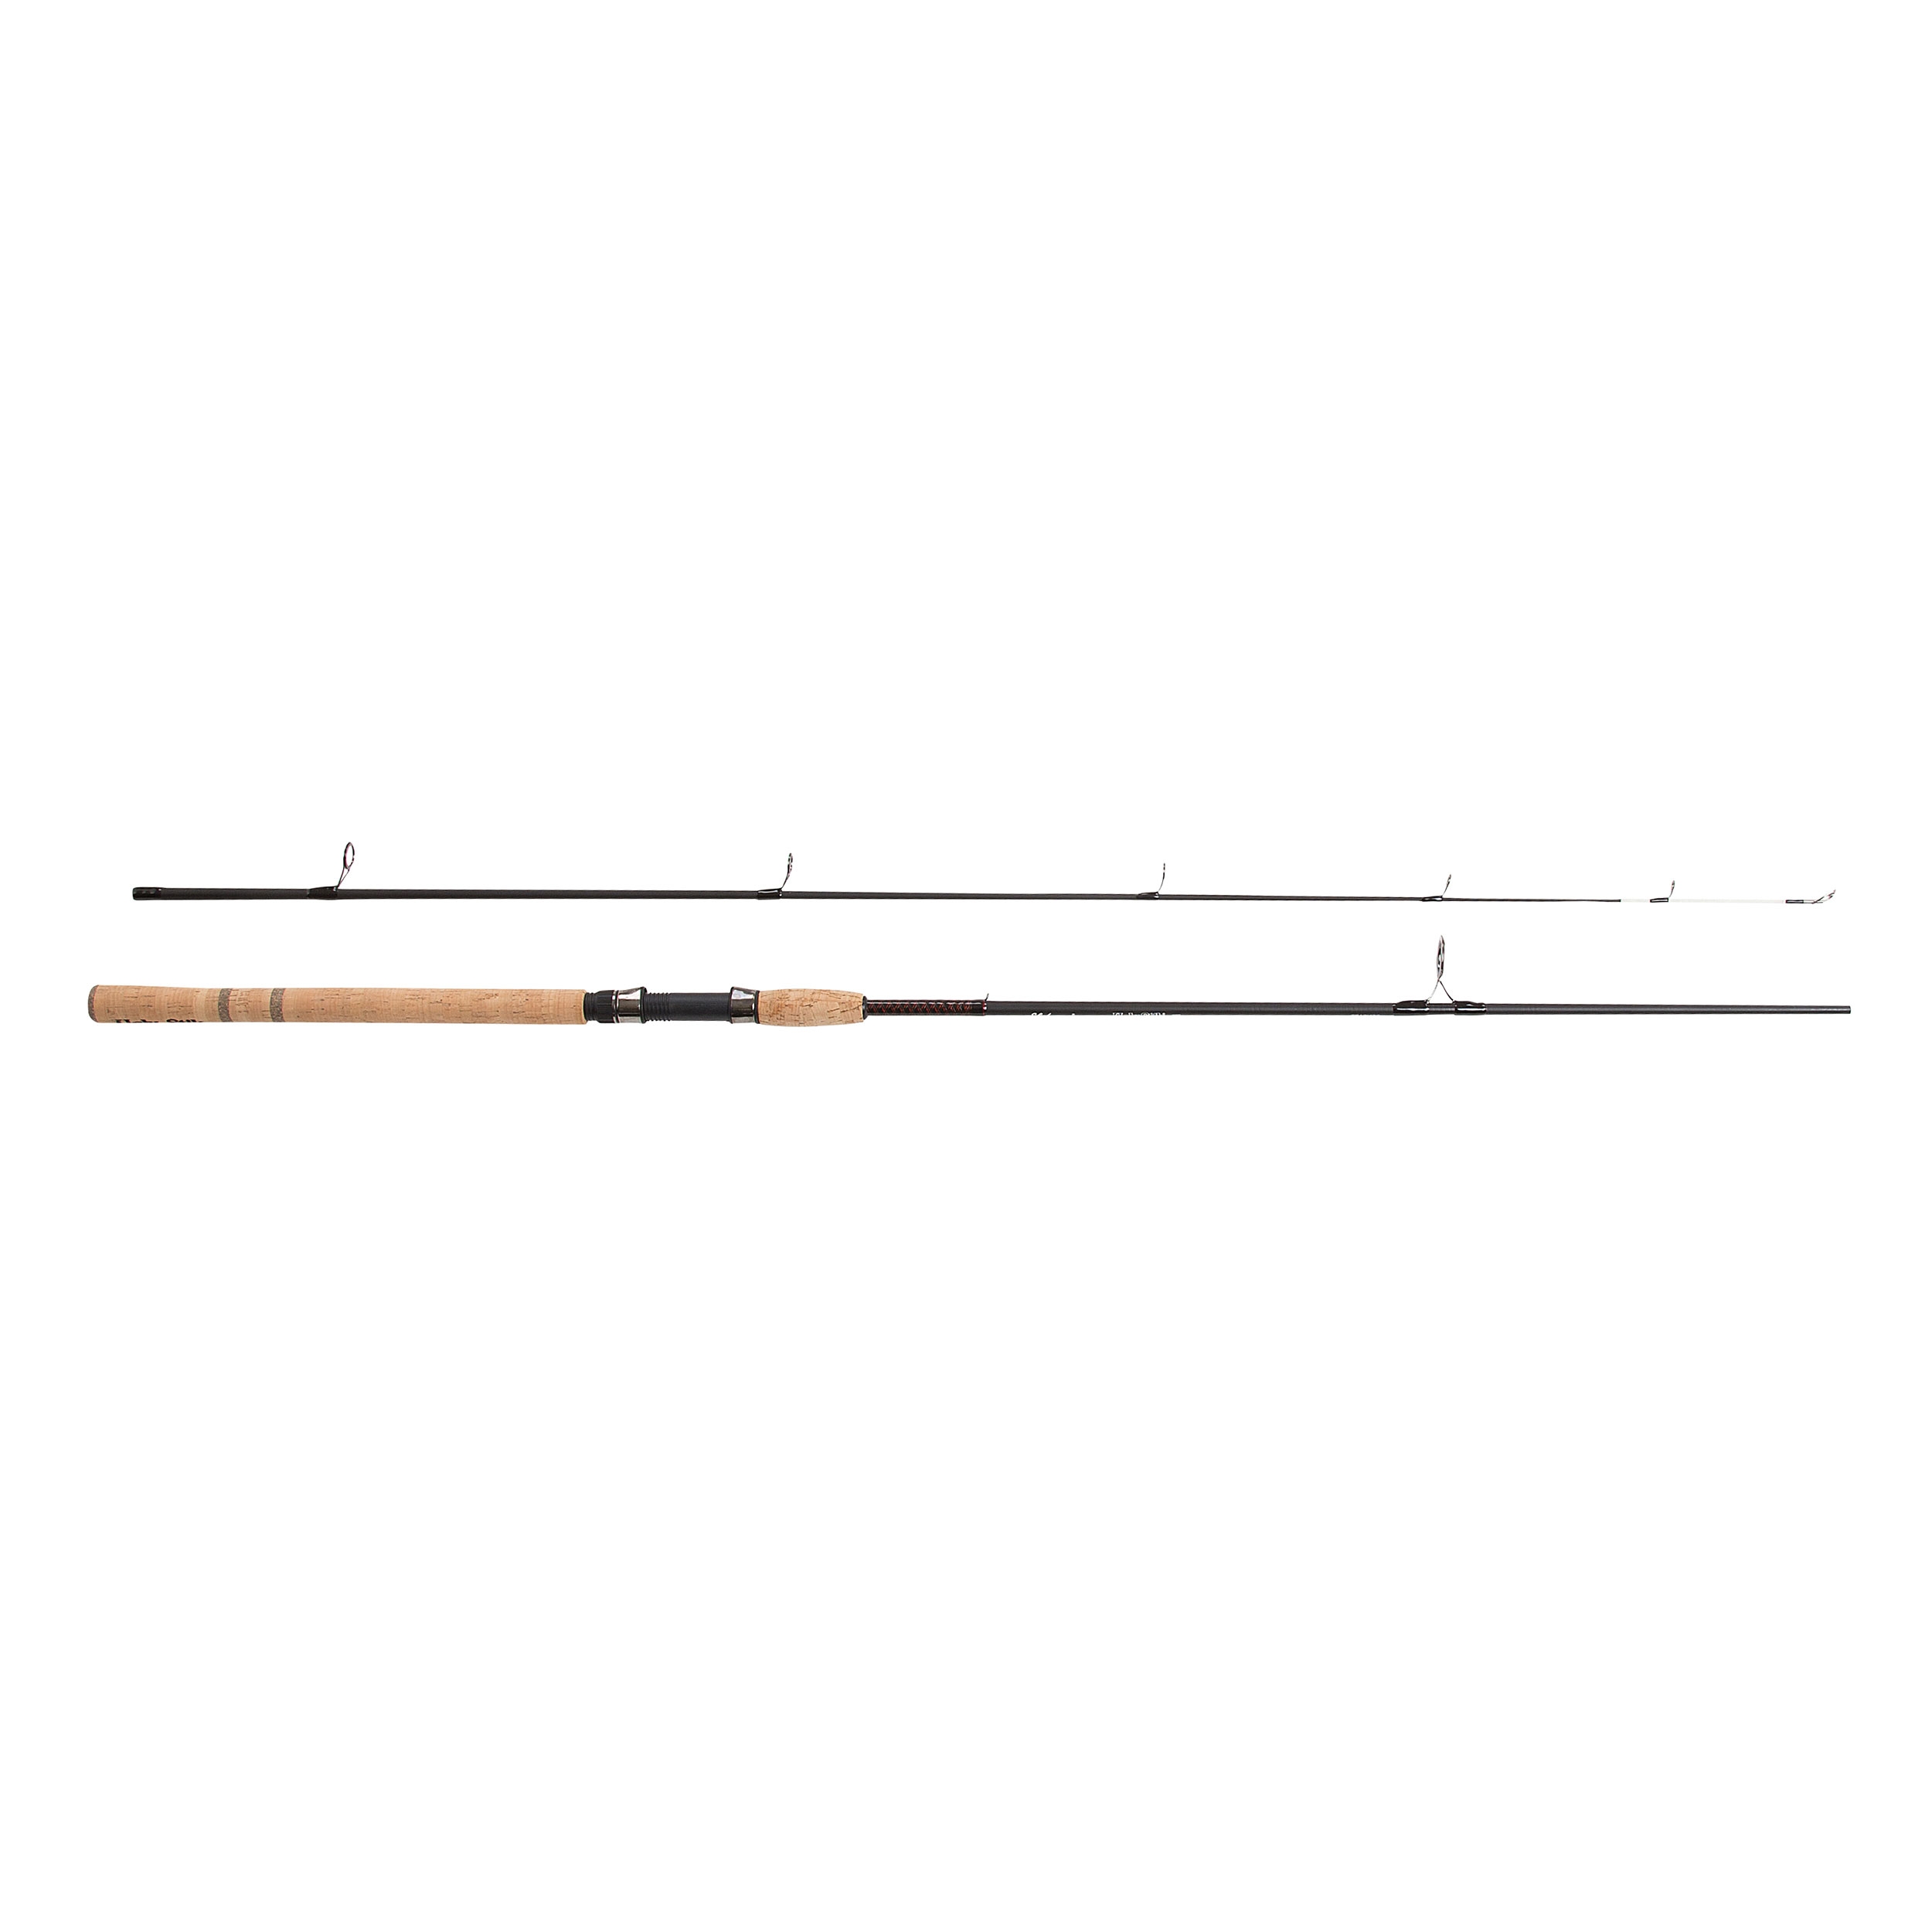 https://cdn.anglingactive.co.uk/media/catalog/product/cache/c7a5695839b539f20c8015776a05748c/s/h/shakespeare_ugly_stik_elite_spin_rod_-_spinning_fishing_rods.jpg